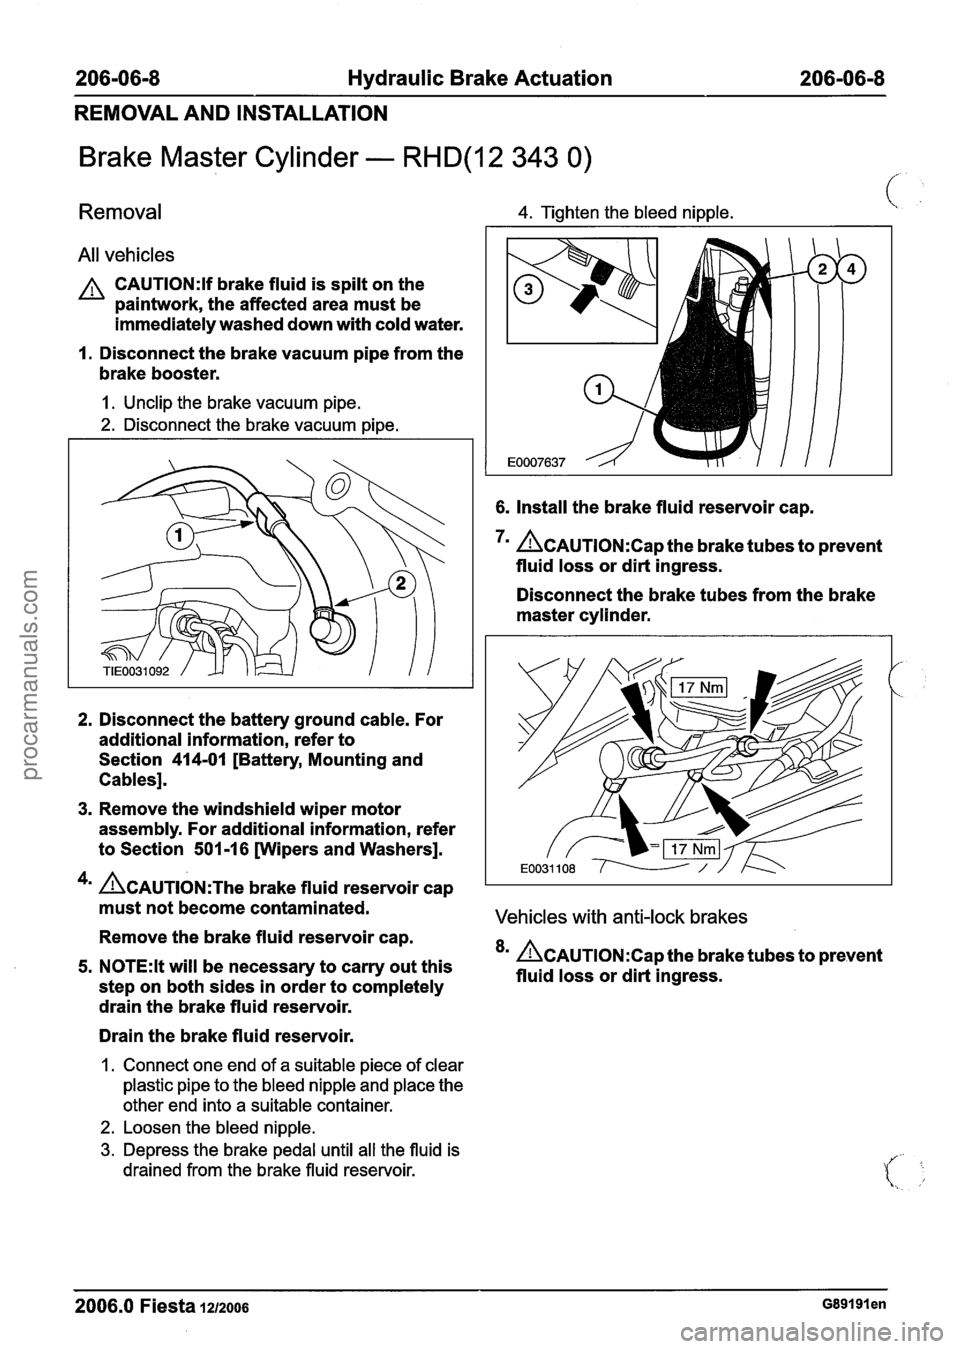 FORD FIESTA 2007  Workshop Manual 
206-06-8 Hydraulic Brake Actuation 206-06-8 
REMOVAL AND INSTALLATION 
Brake Master Cylinder - RHD(12 343 0) 
Removal 4. Tighten the bleed nipple. \, 
All vehicles 
CAUTI0N:lf brake  fluid is spilt  